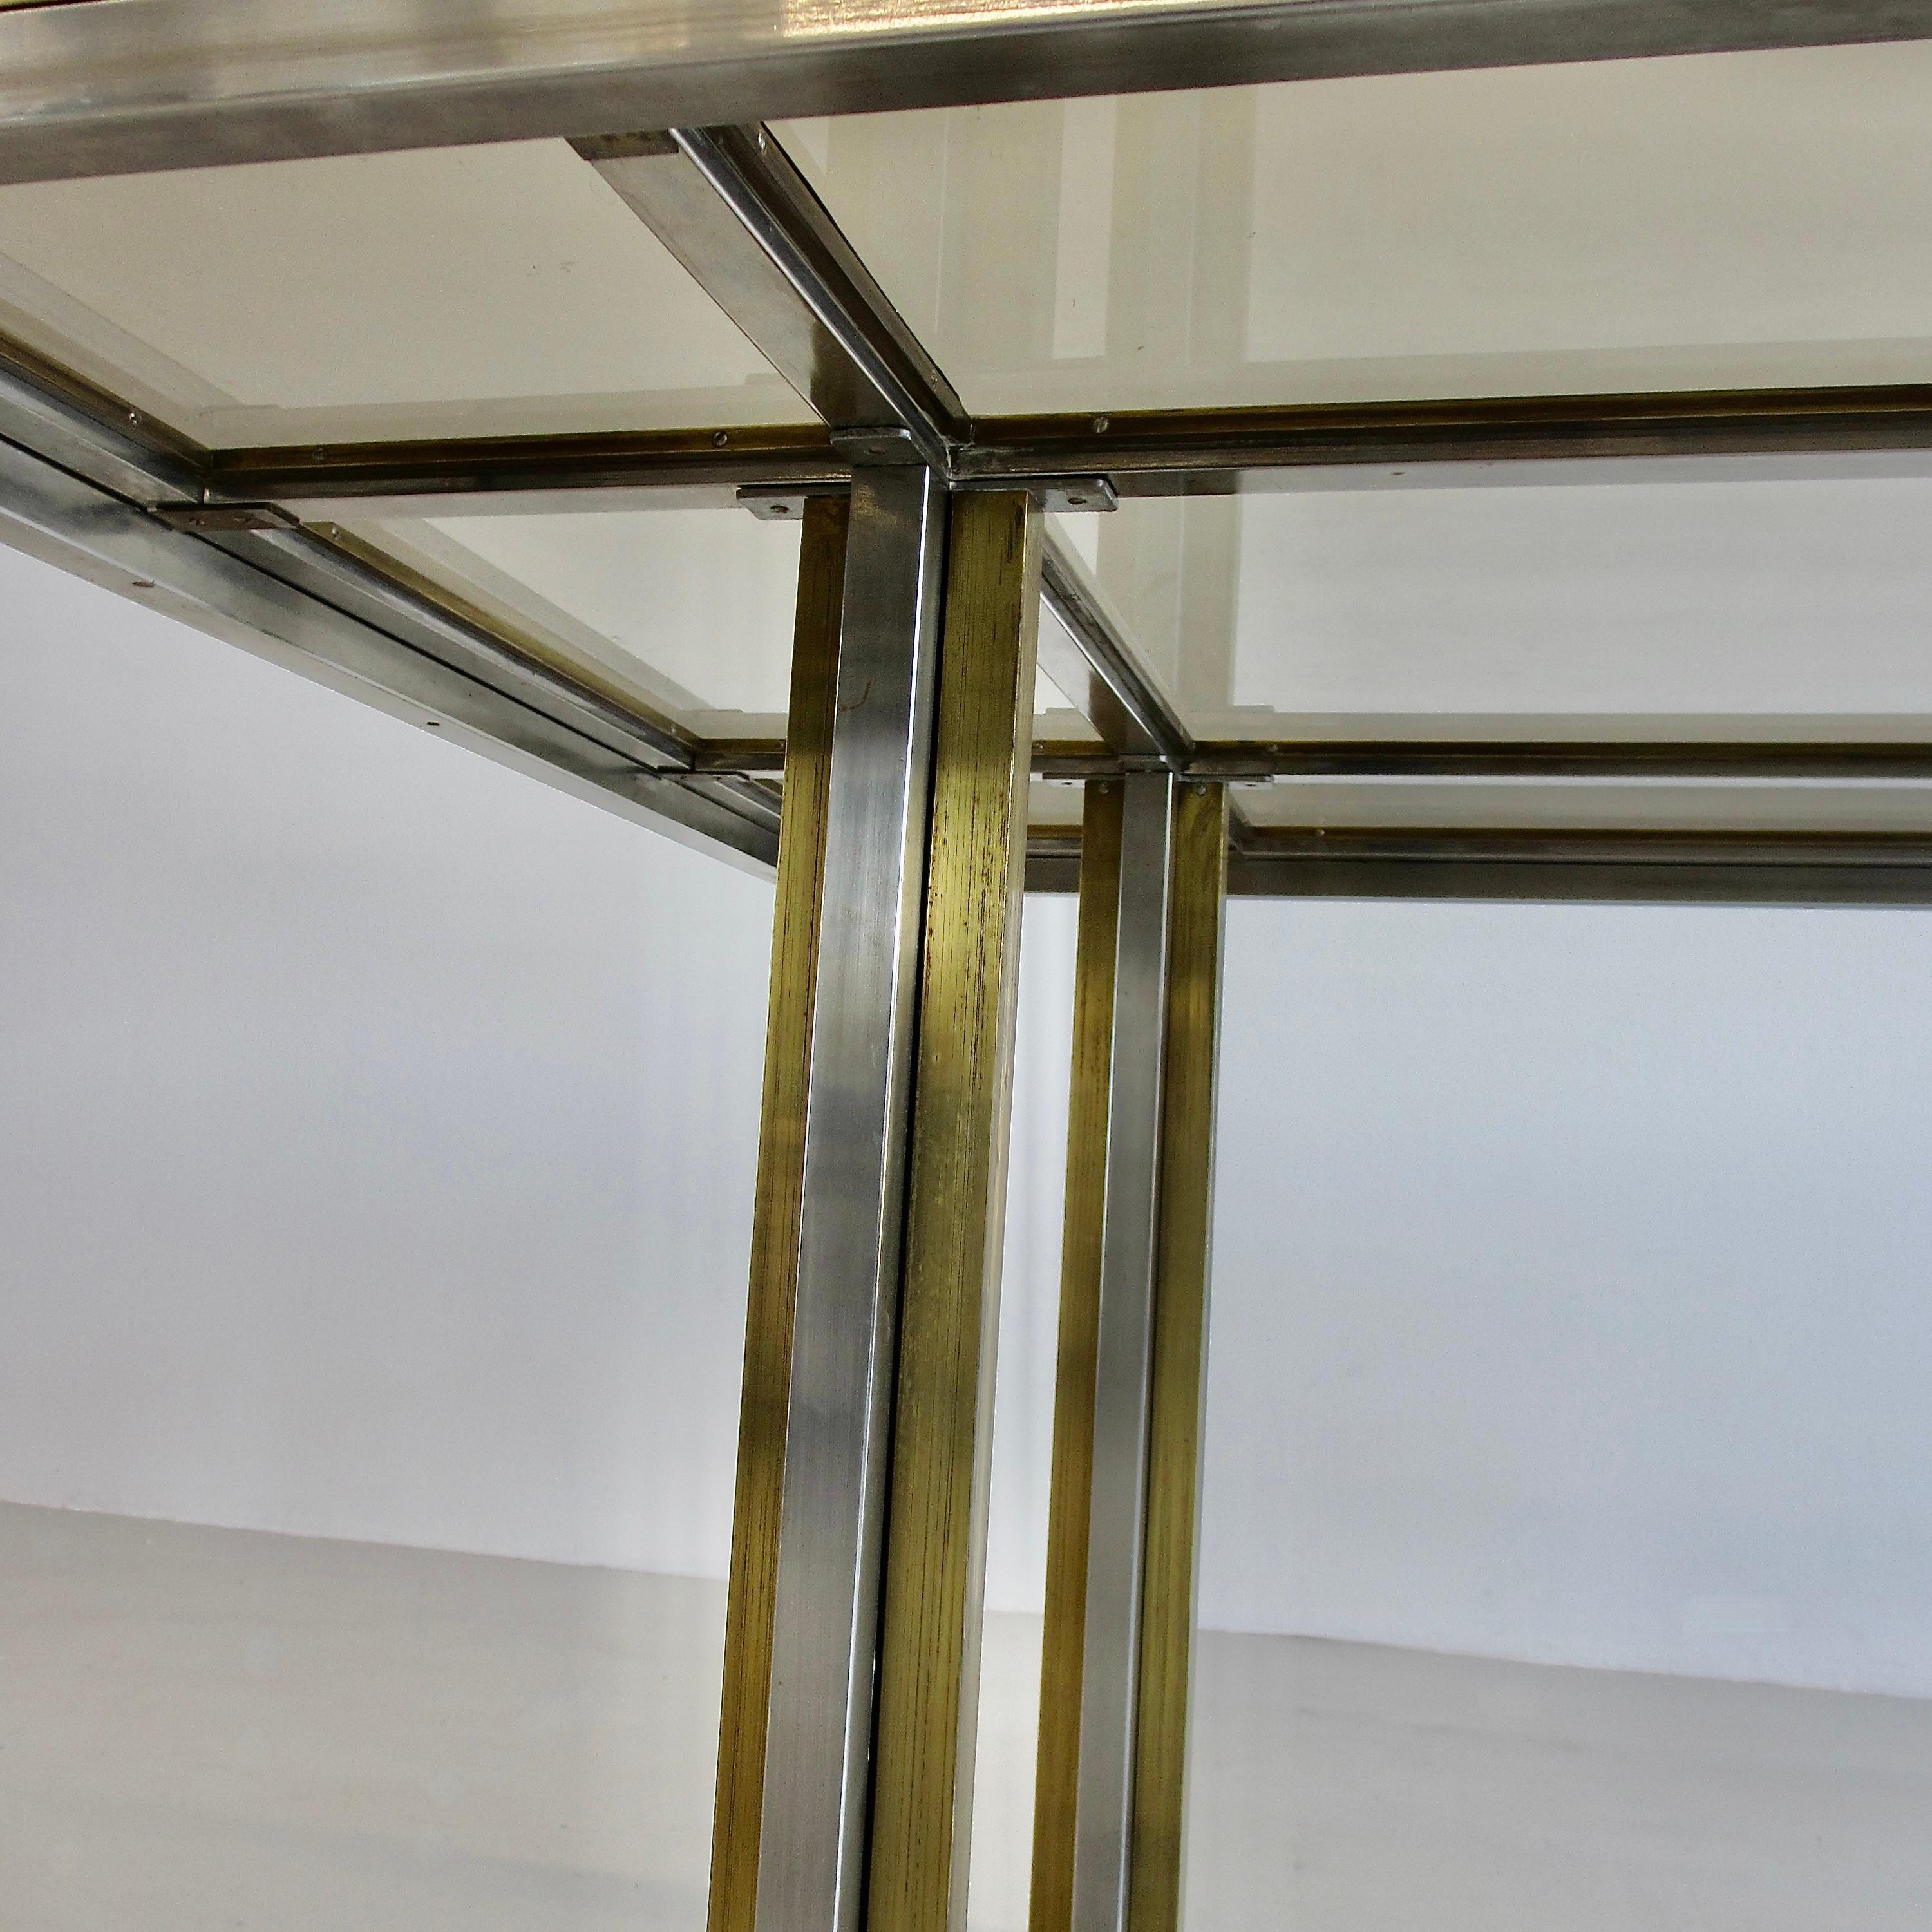 Dining table, designed by Romeo Rega. France, Metalarte, c1975.

A large dining table in brass and chromed metal feet and structure with nine separate smoked glass panel inserts. Beautiful elegant design by Rega.
Condition:  

Vintage